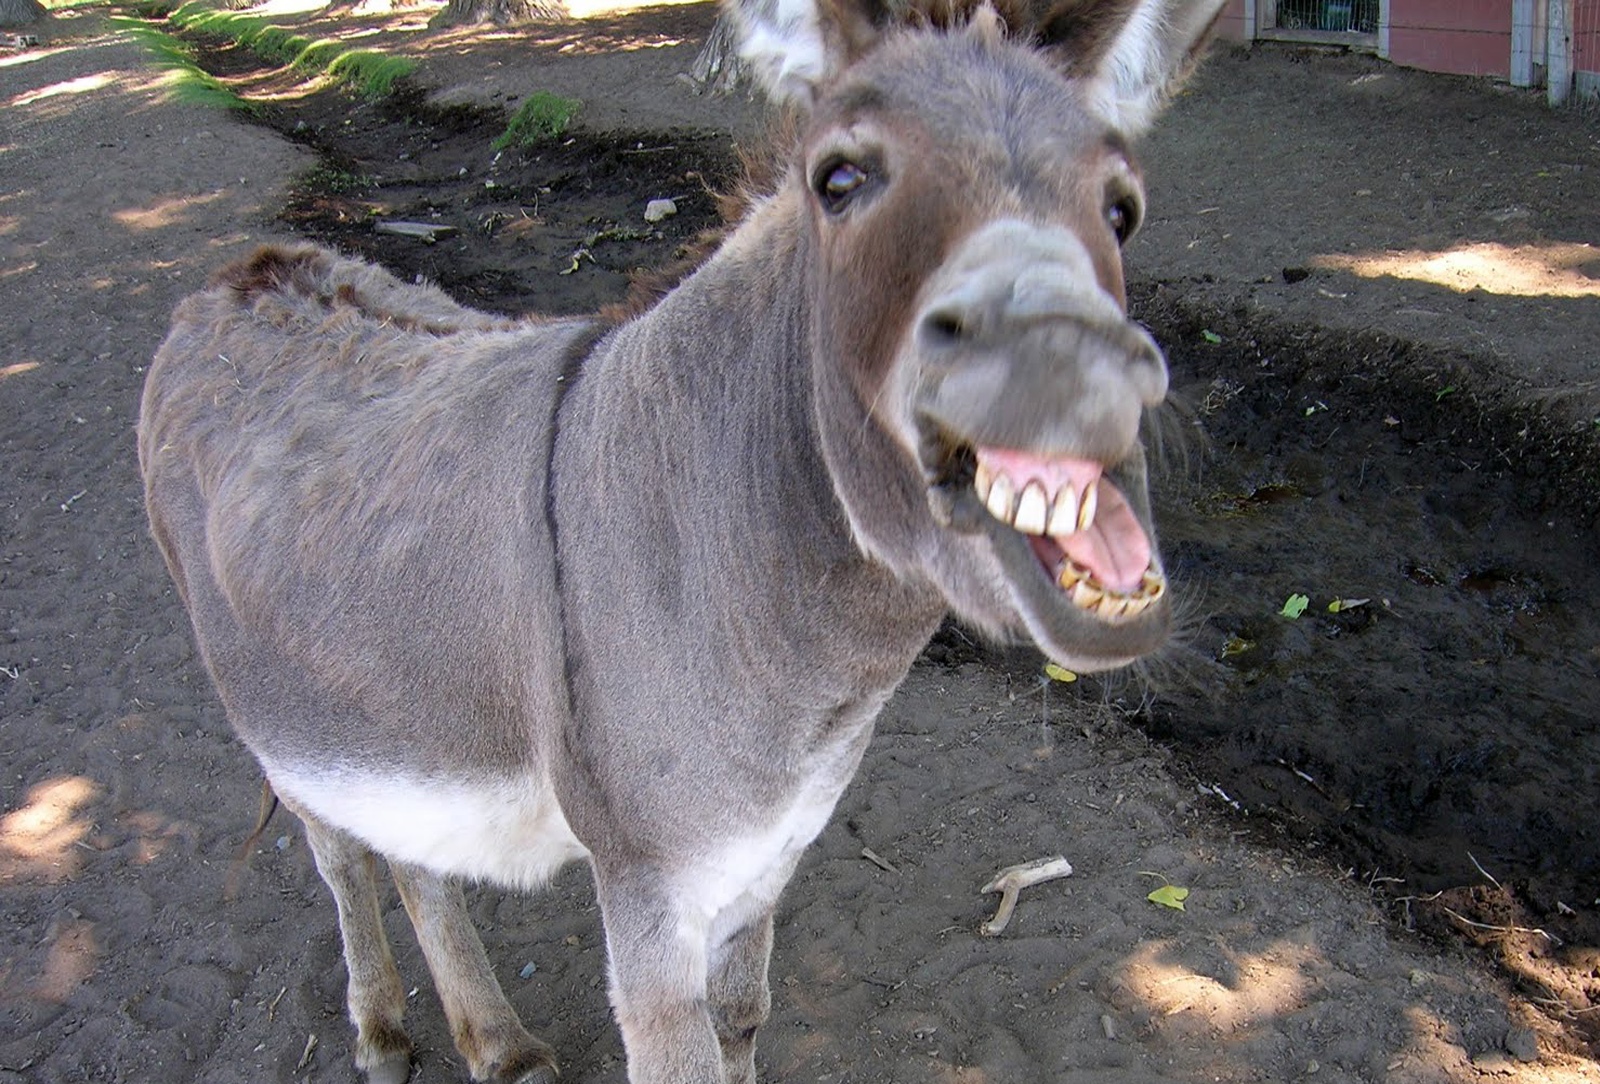 OMG: Admit Card issued to donkey in Kashmir valley!